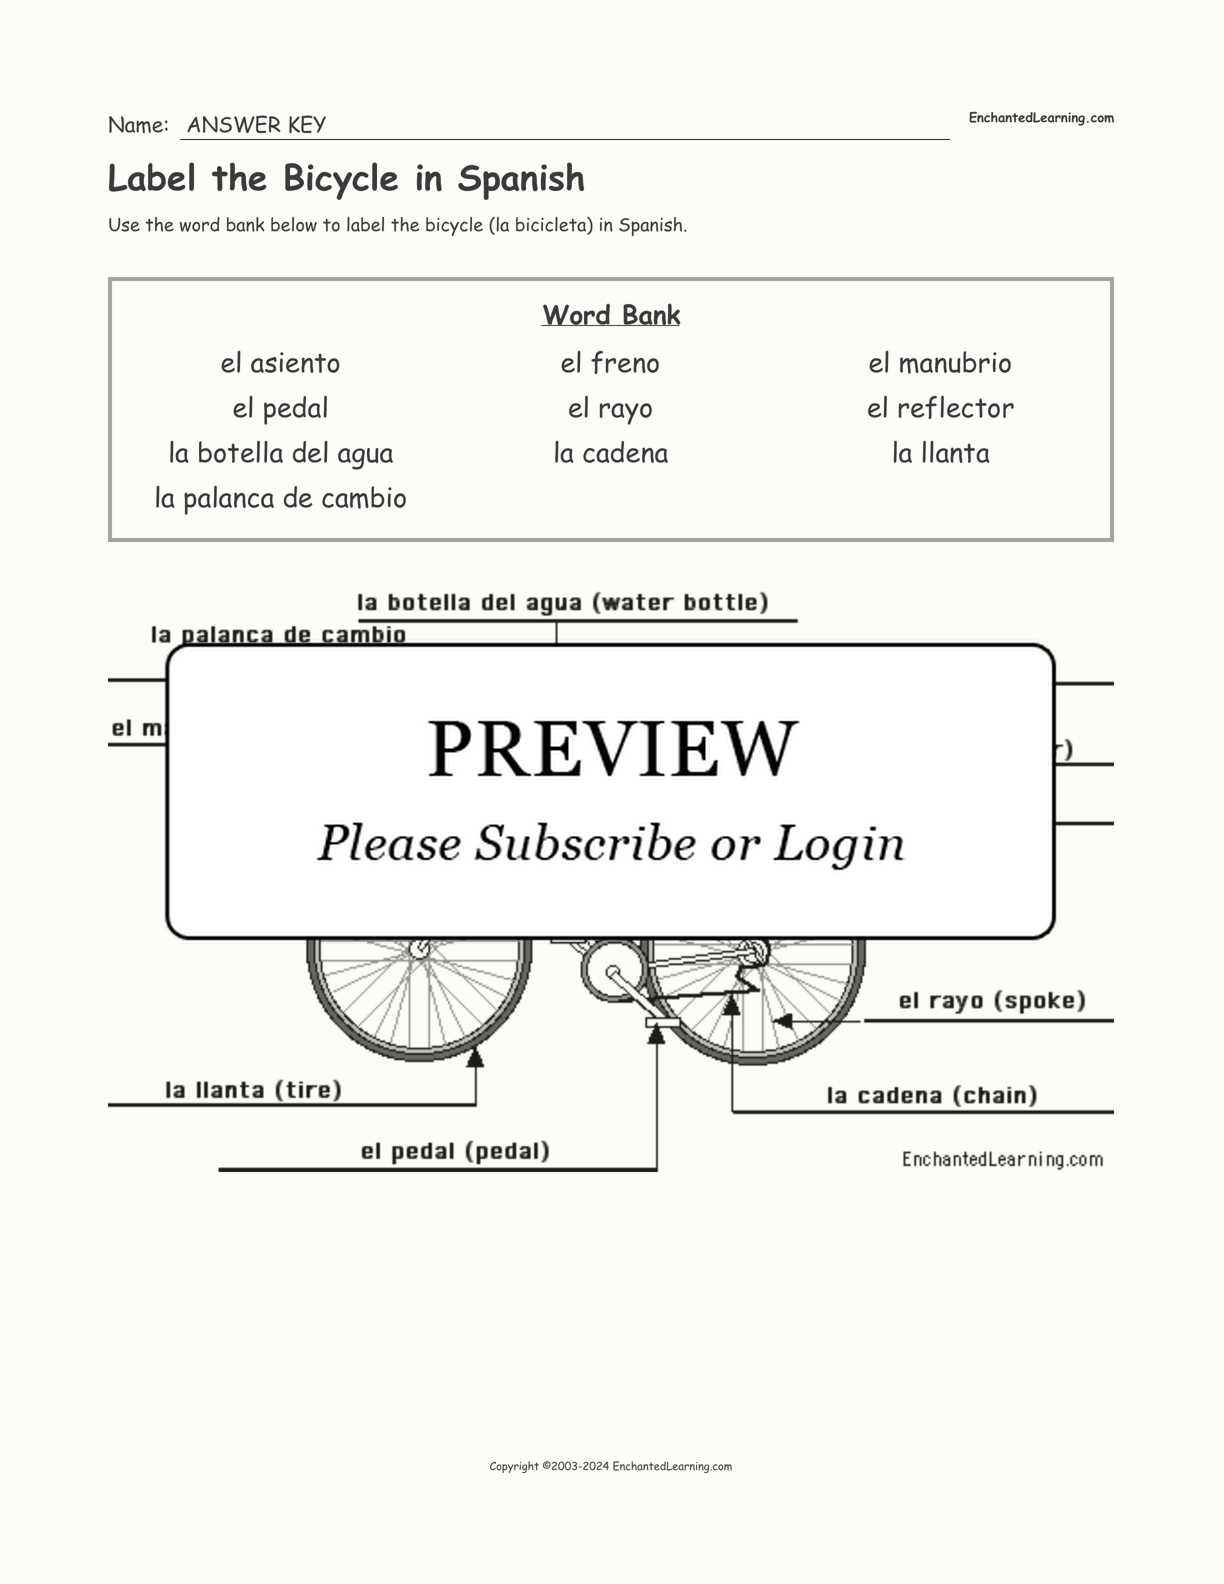 Label the Bicycle in Spanish interactive worksheet page 2